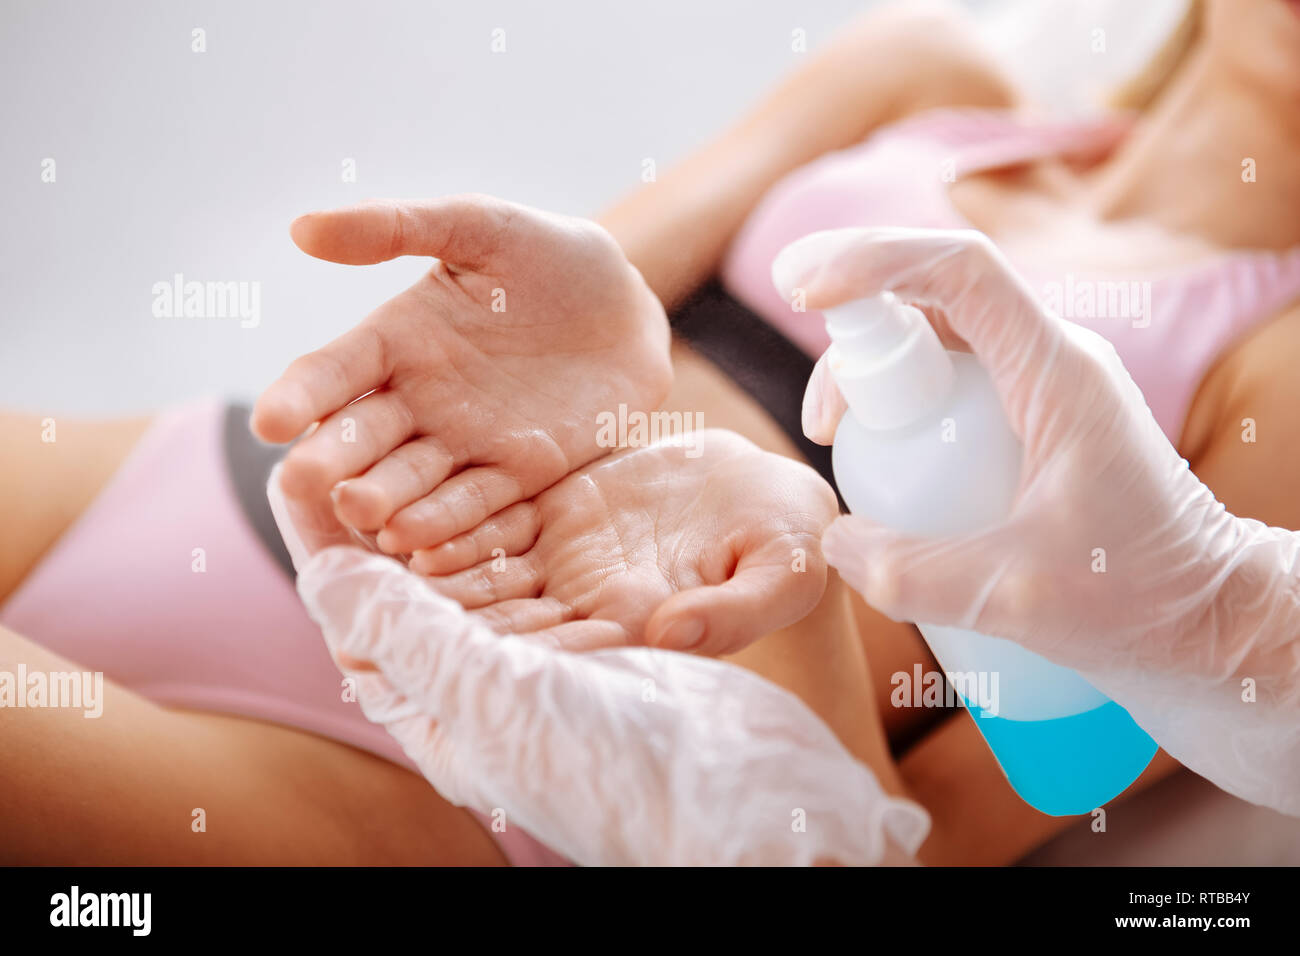 Specialist disinfecting hands of client before starting depilation Stock Photo